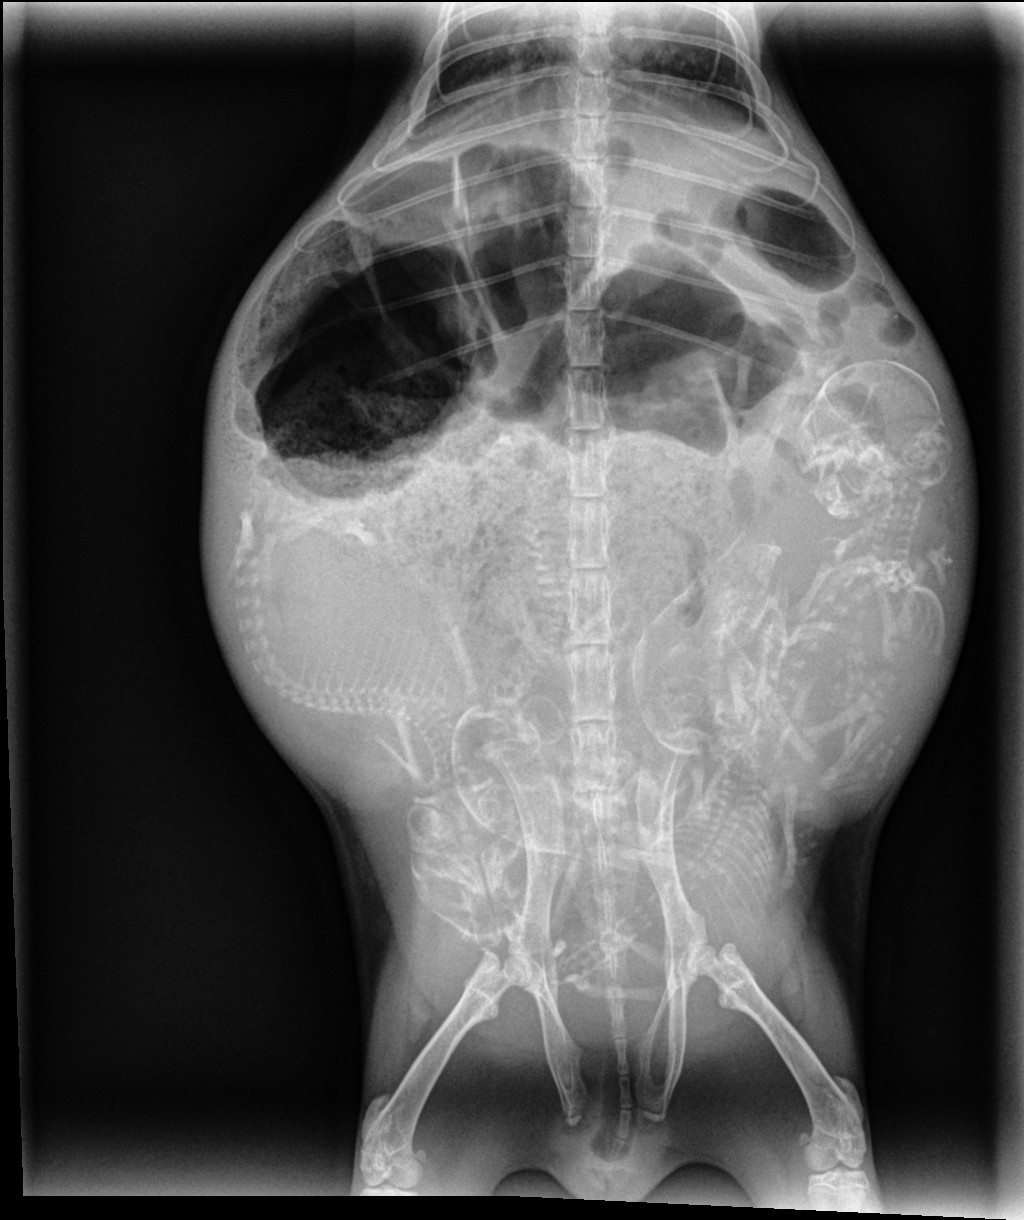 Pregnant Guinea Pig X-ray showing fetuses